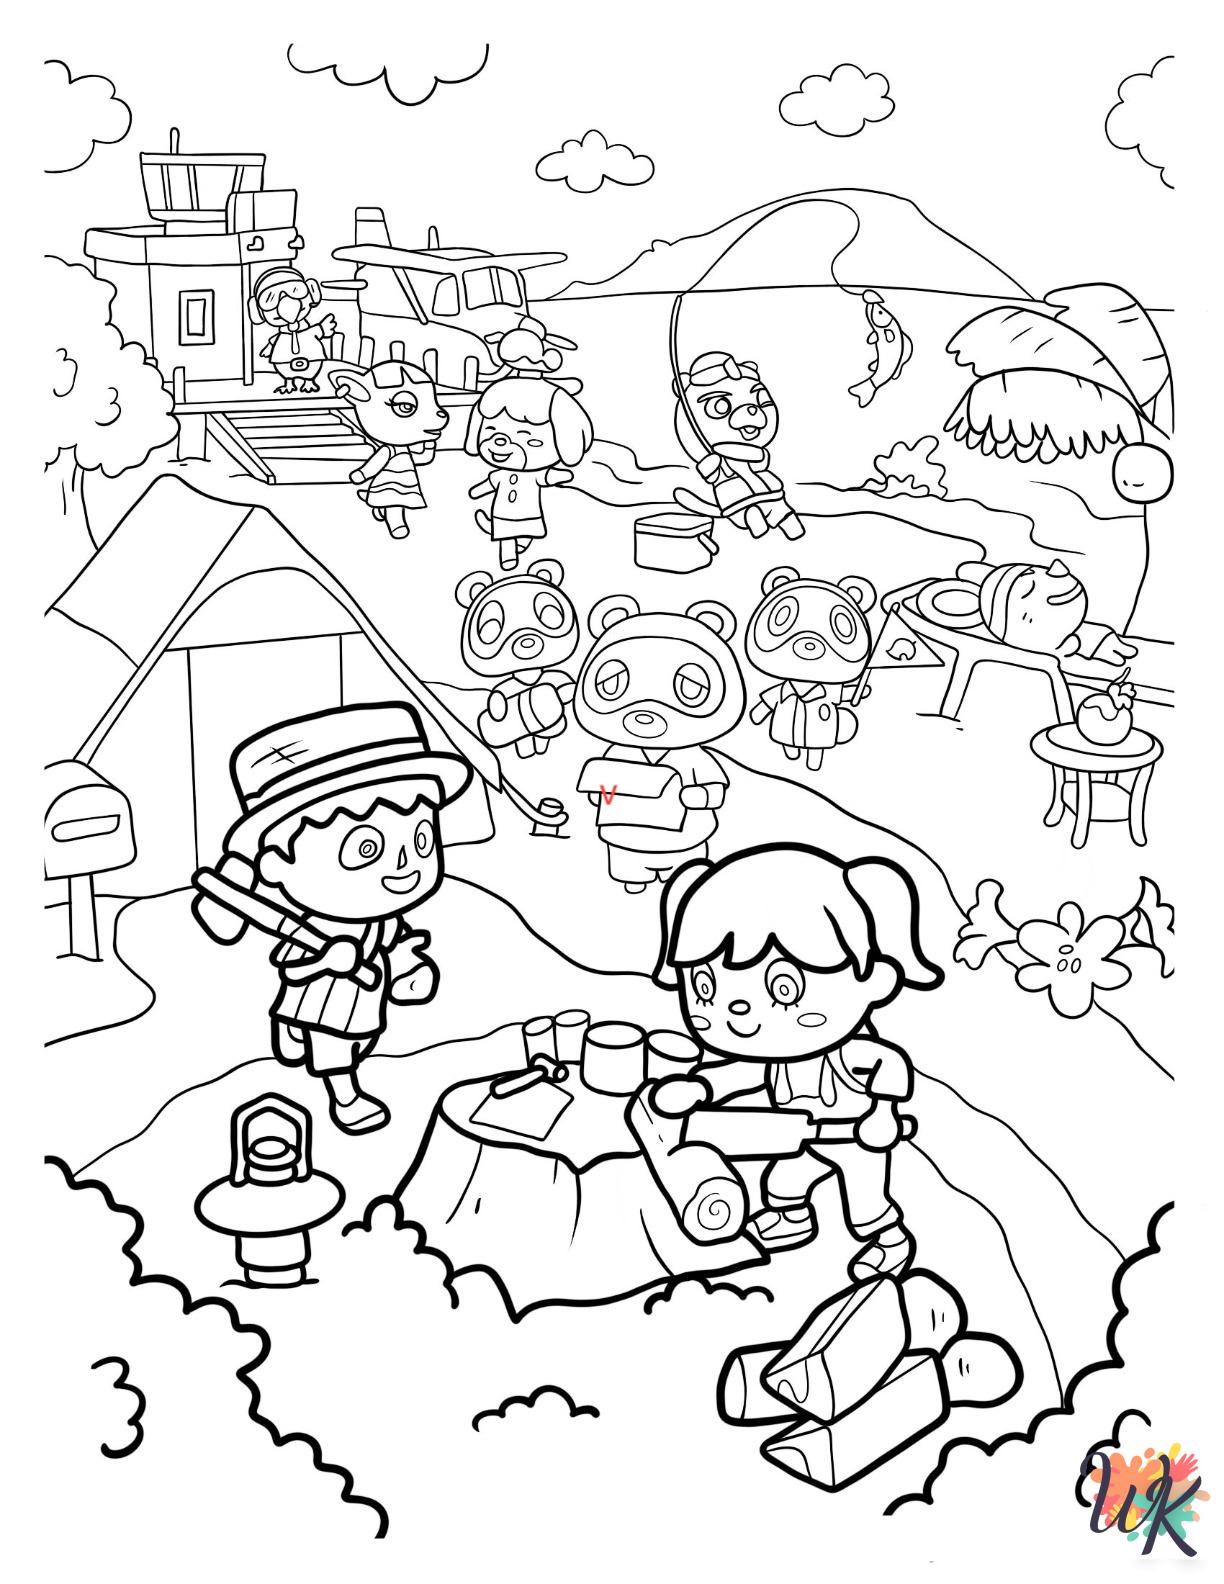 Animal Crossing coloring pages for adults easy